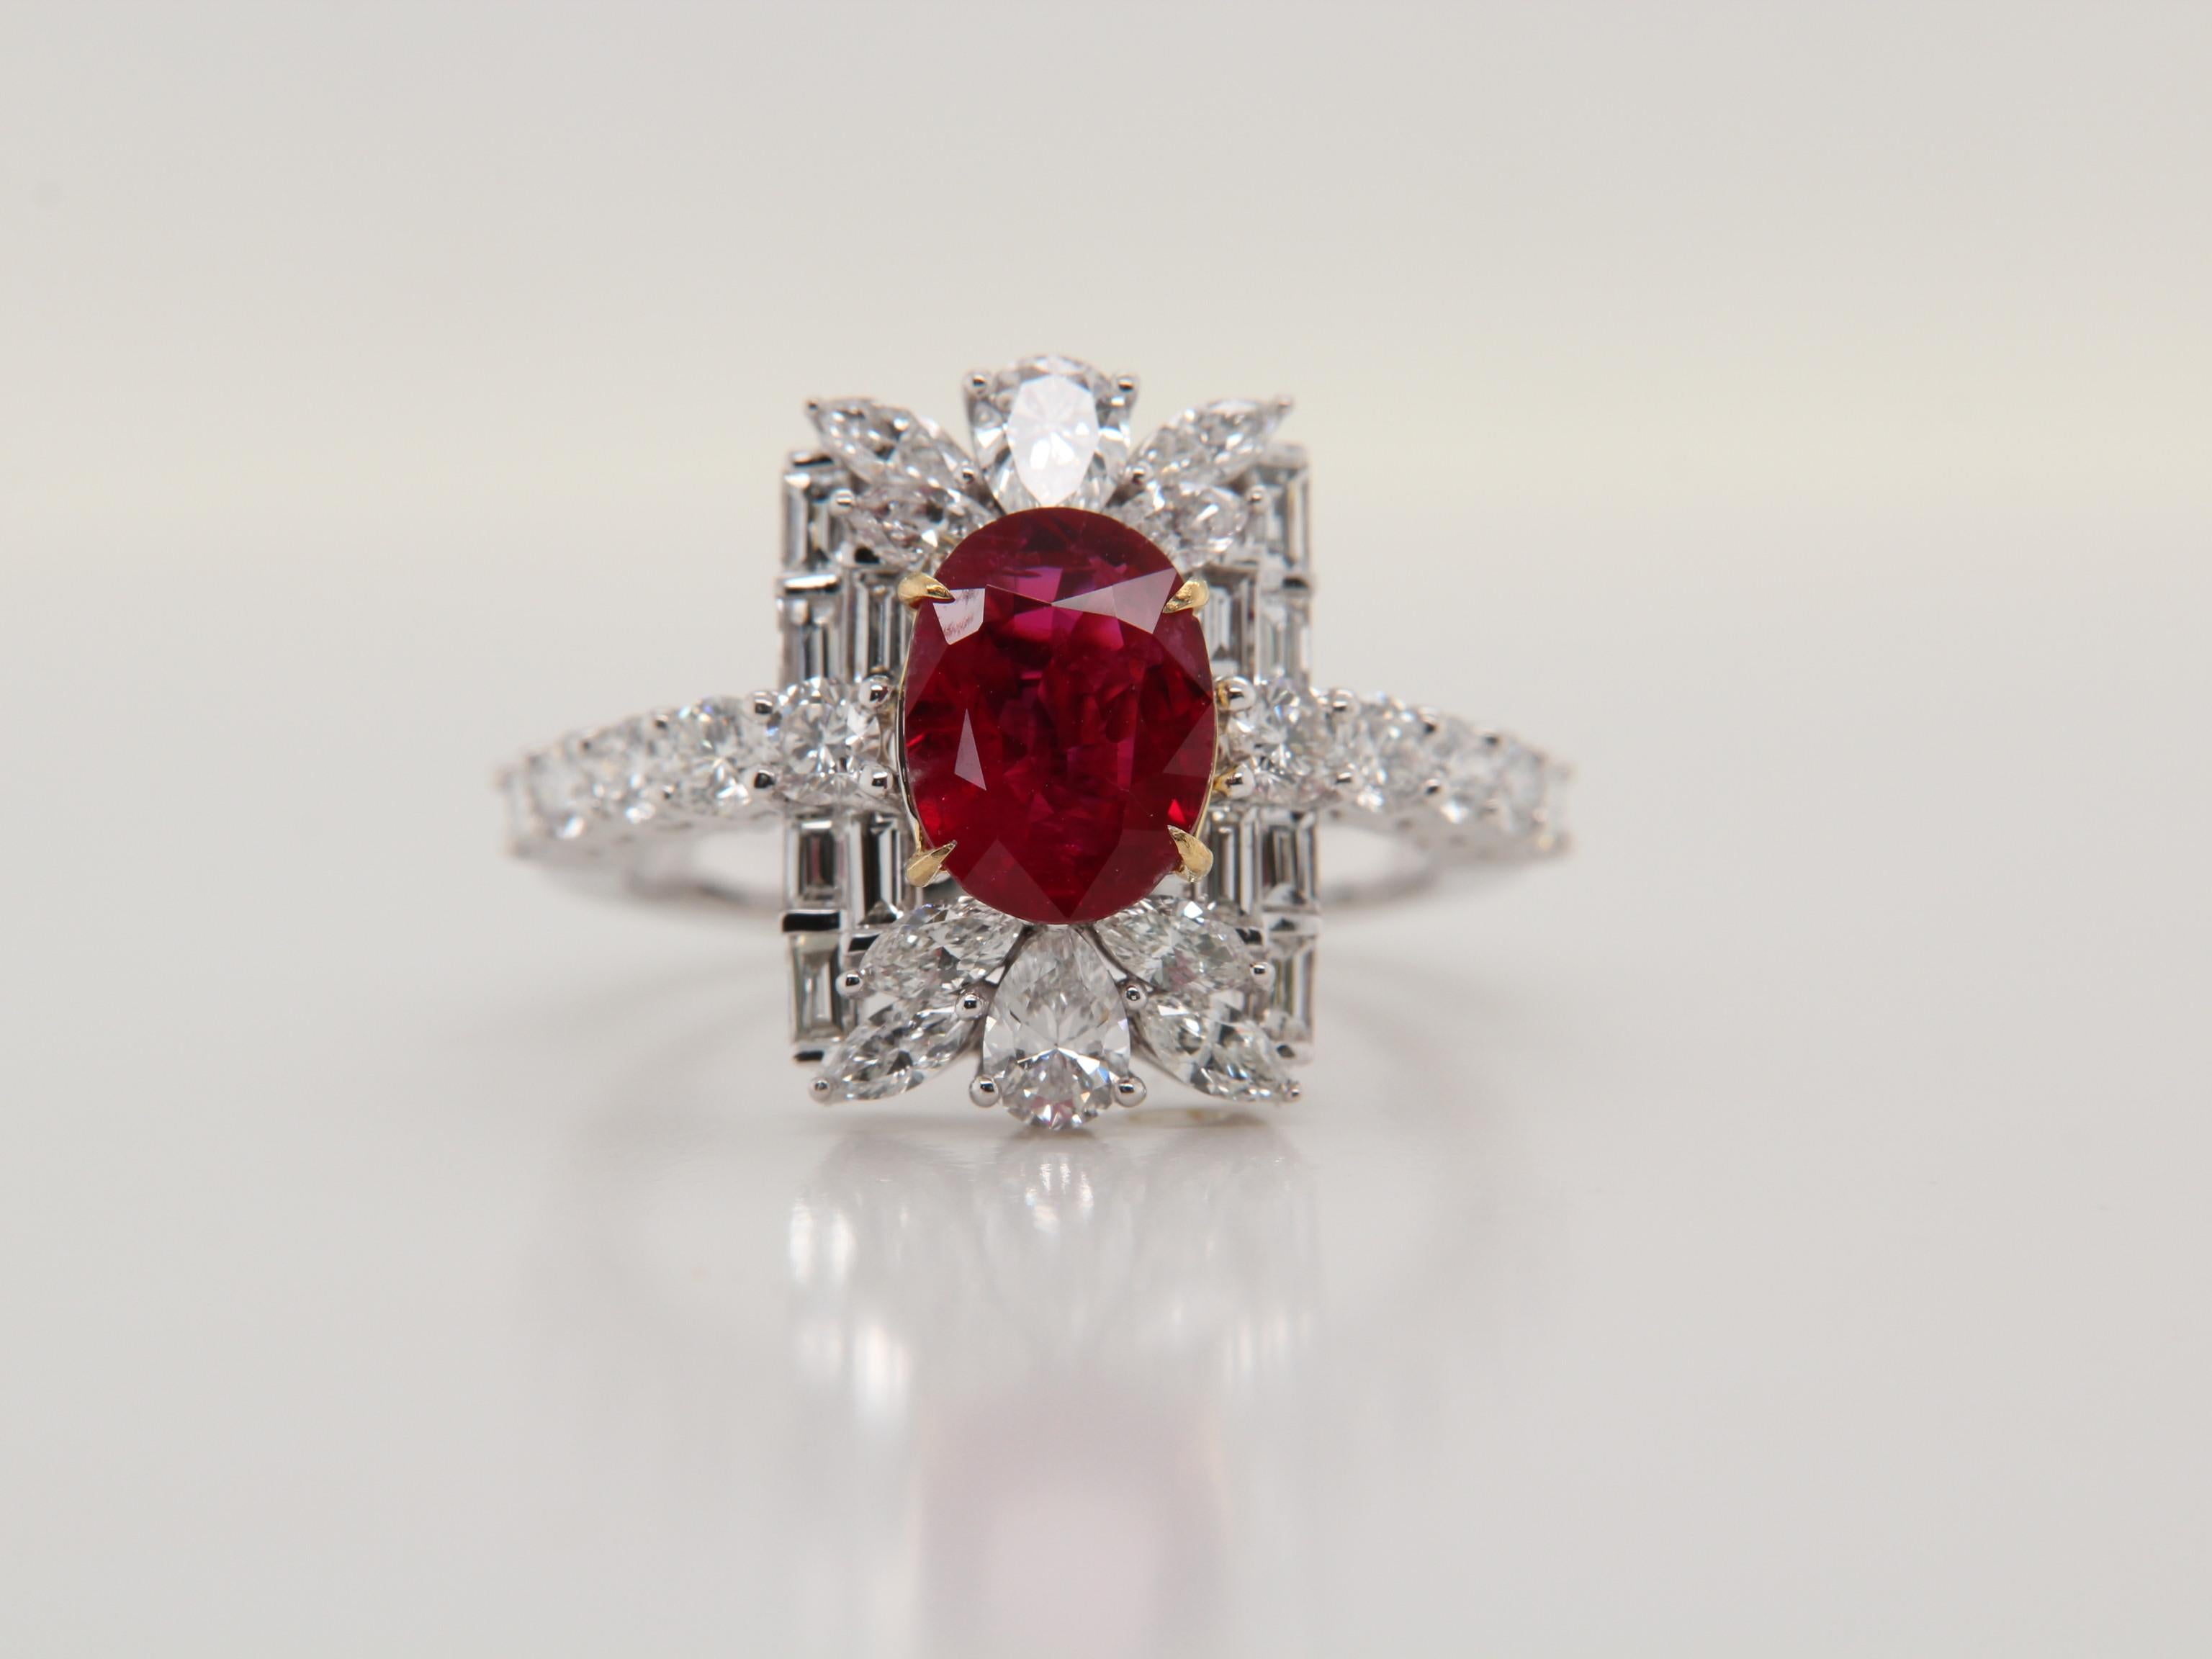 A brand new Burmese ruby and diamond ring by Rewa Jewelry. The mounting is handmade in 18 Karat white gold and set with a 1.43 Carat ruby in the center. The ruby is certified by Gem Research Swisslab as natural, 'Pigeon Blood', and without any heat